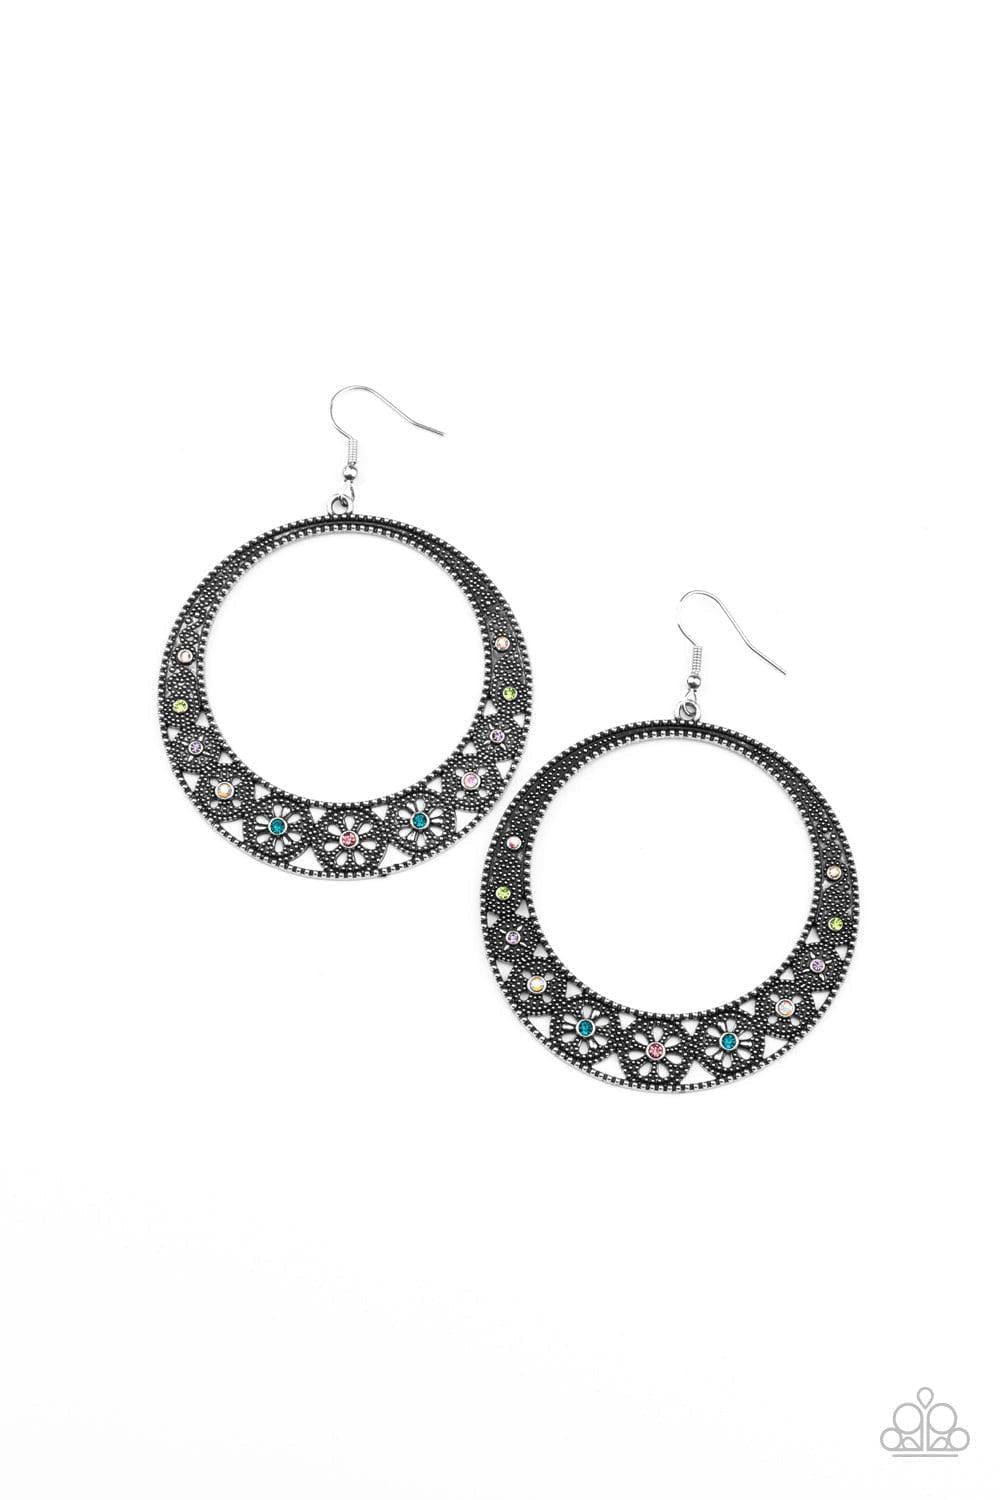 Paparazzi Accessories - Bodaciously Blooming - Multicolor Earrings - Bling by JessieK